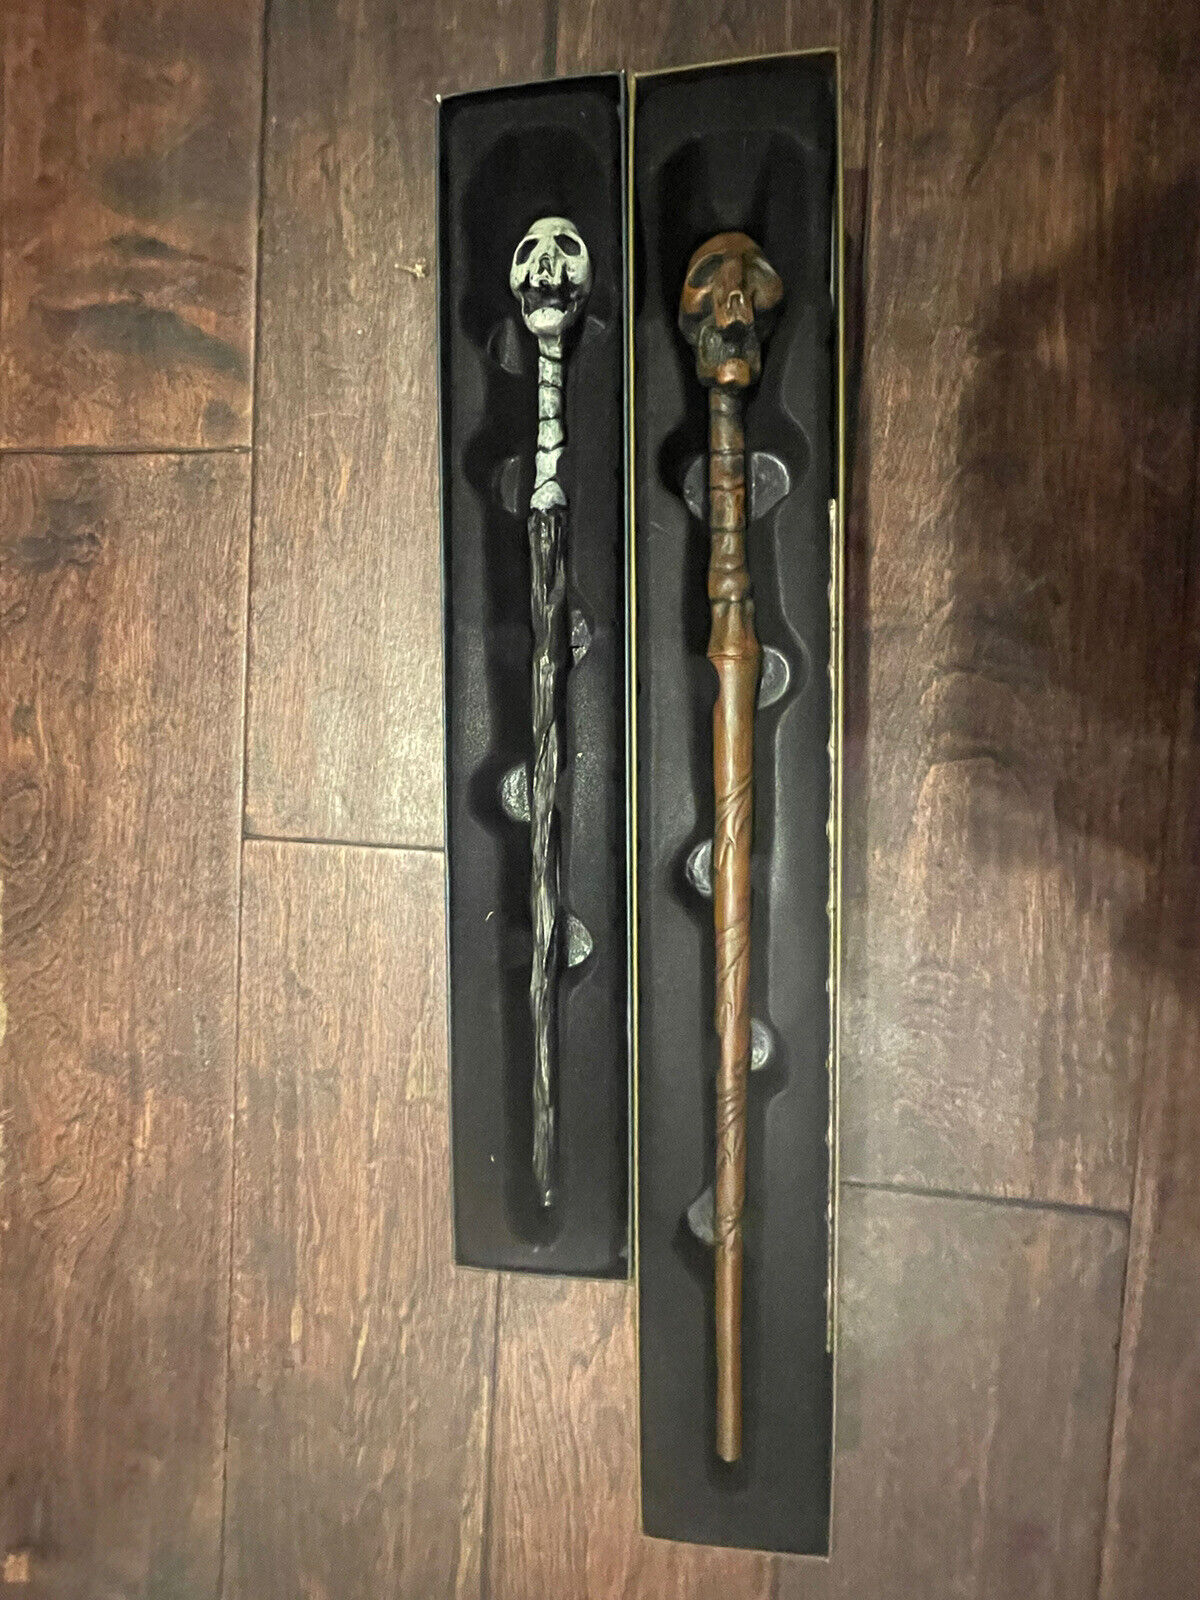 harry potter death eater wands (two wands) still in box 